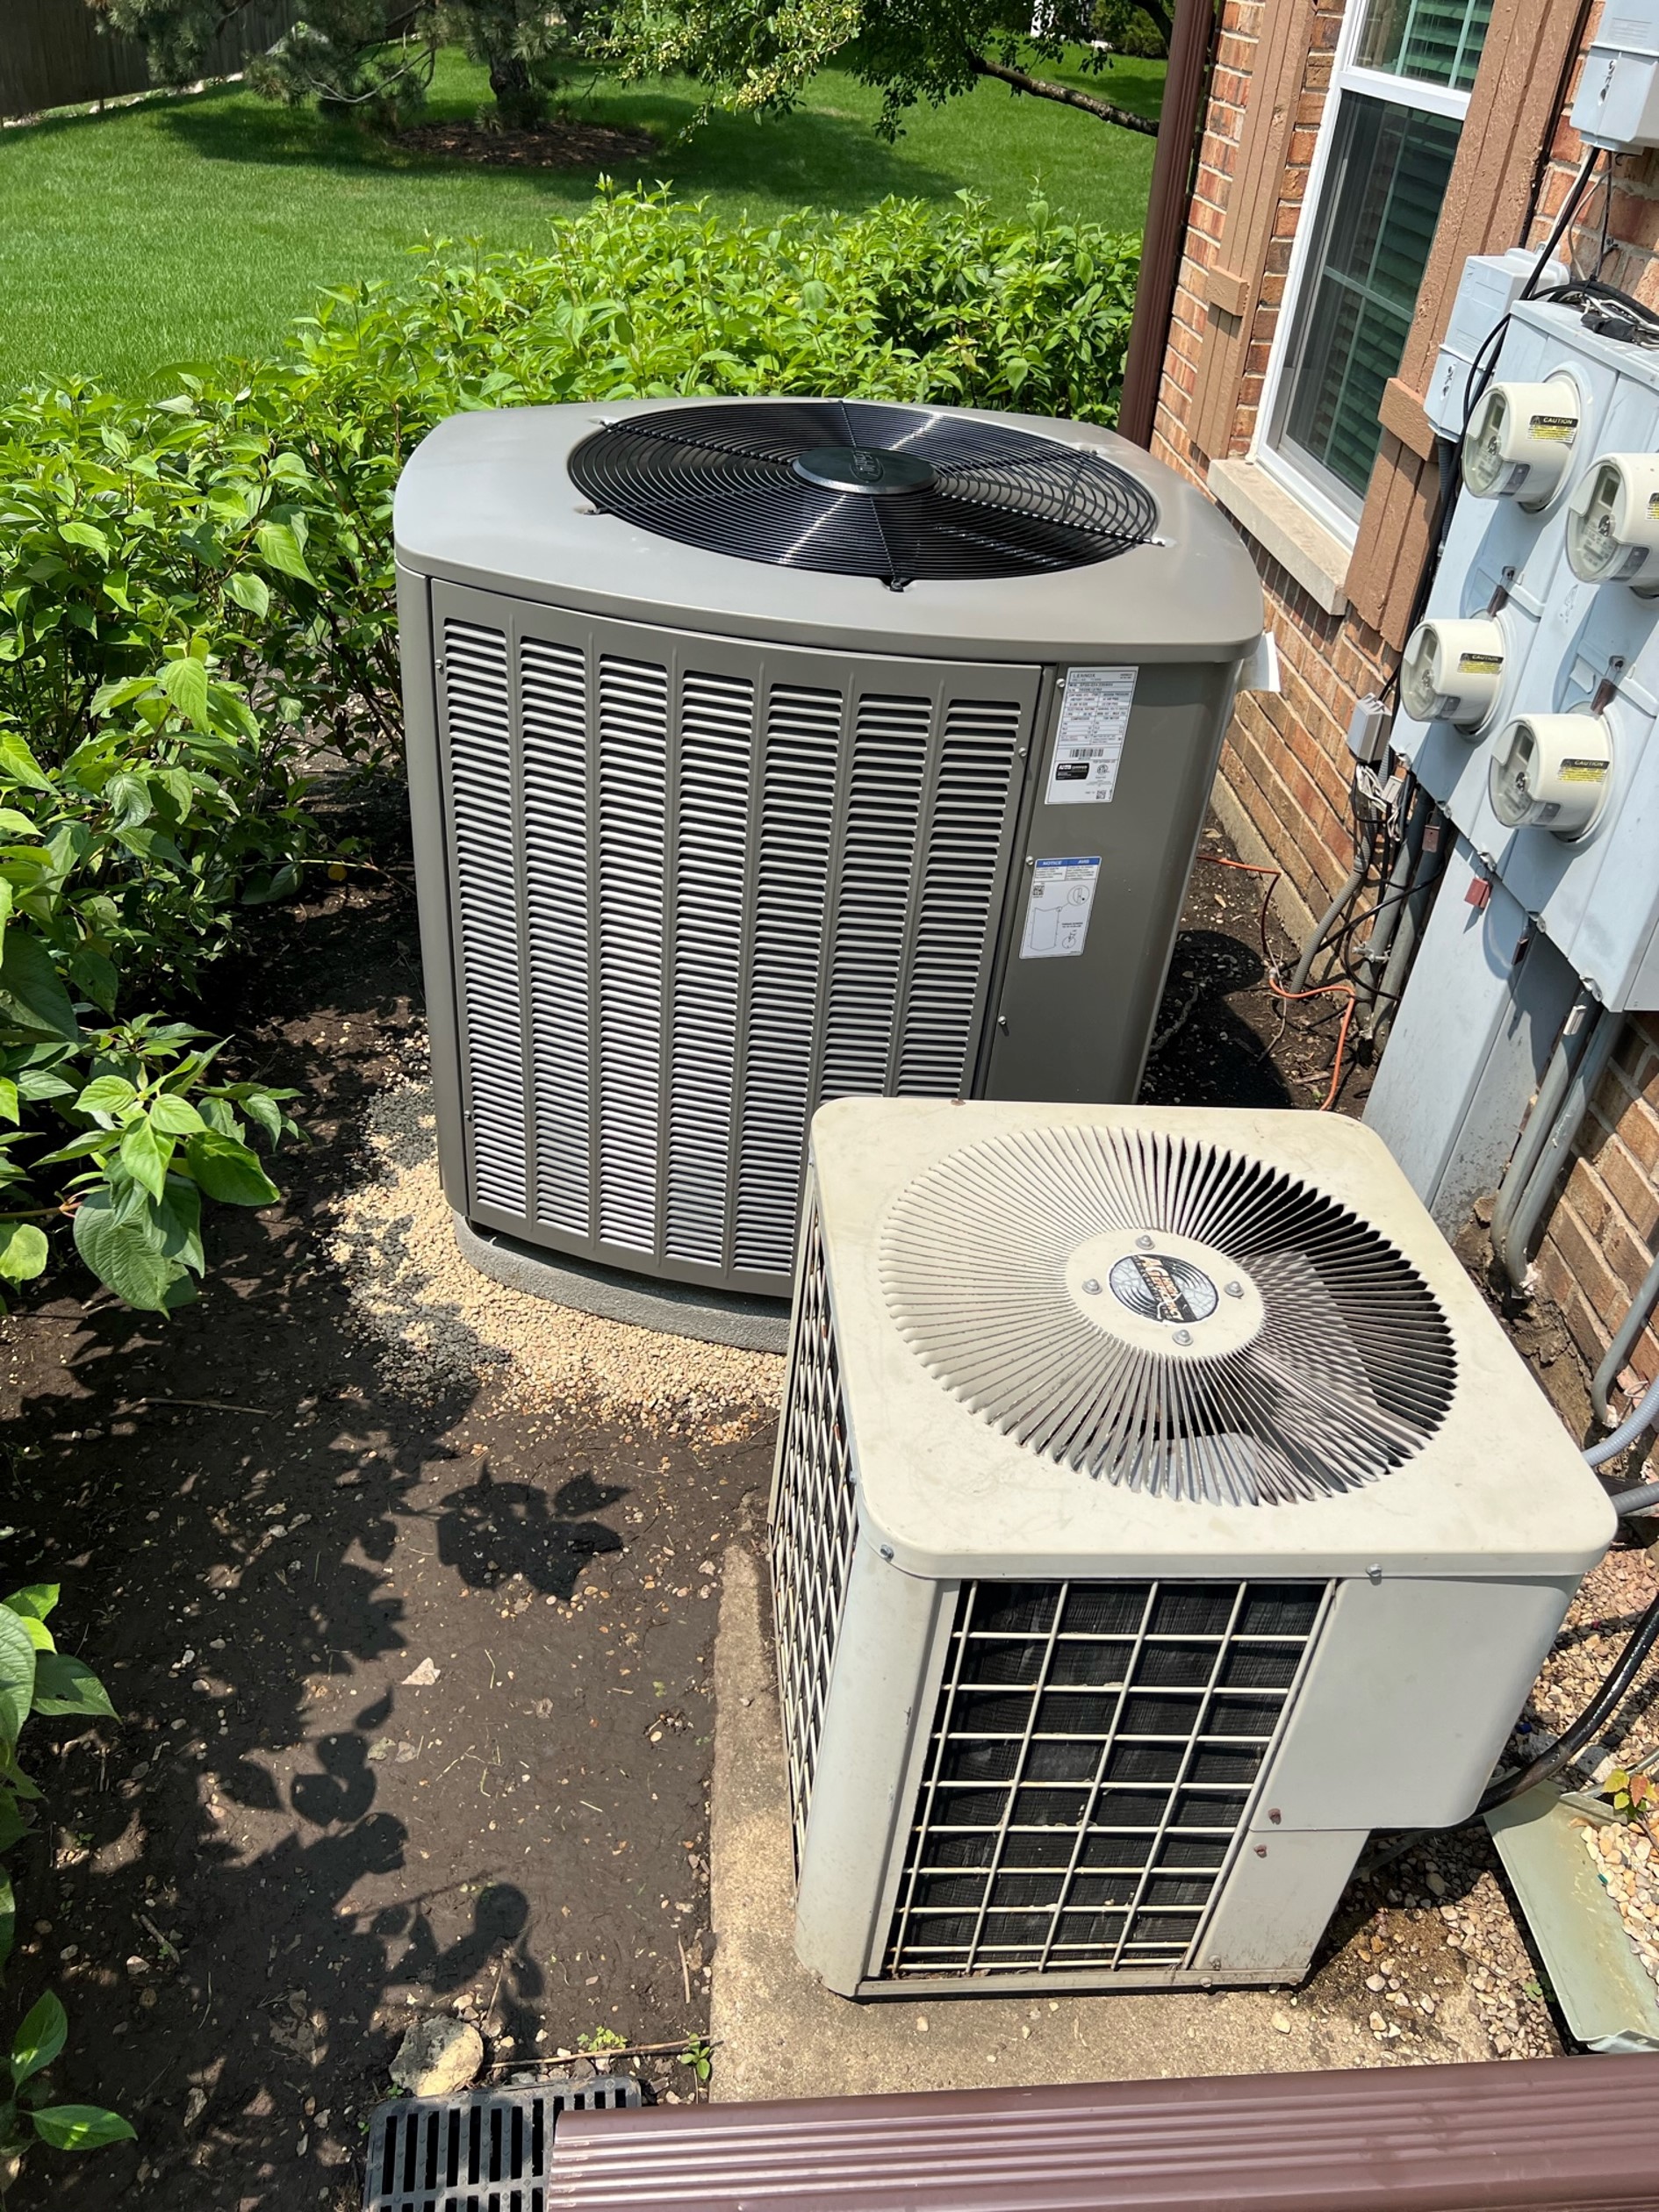 For dependable furnace repair in Streamwood, IL, turn to Pure Comfort Heating and Air Conditioning. We swiftly diagnose and fix furnace issues, restoring your home's warmth and comfort.